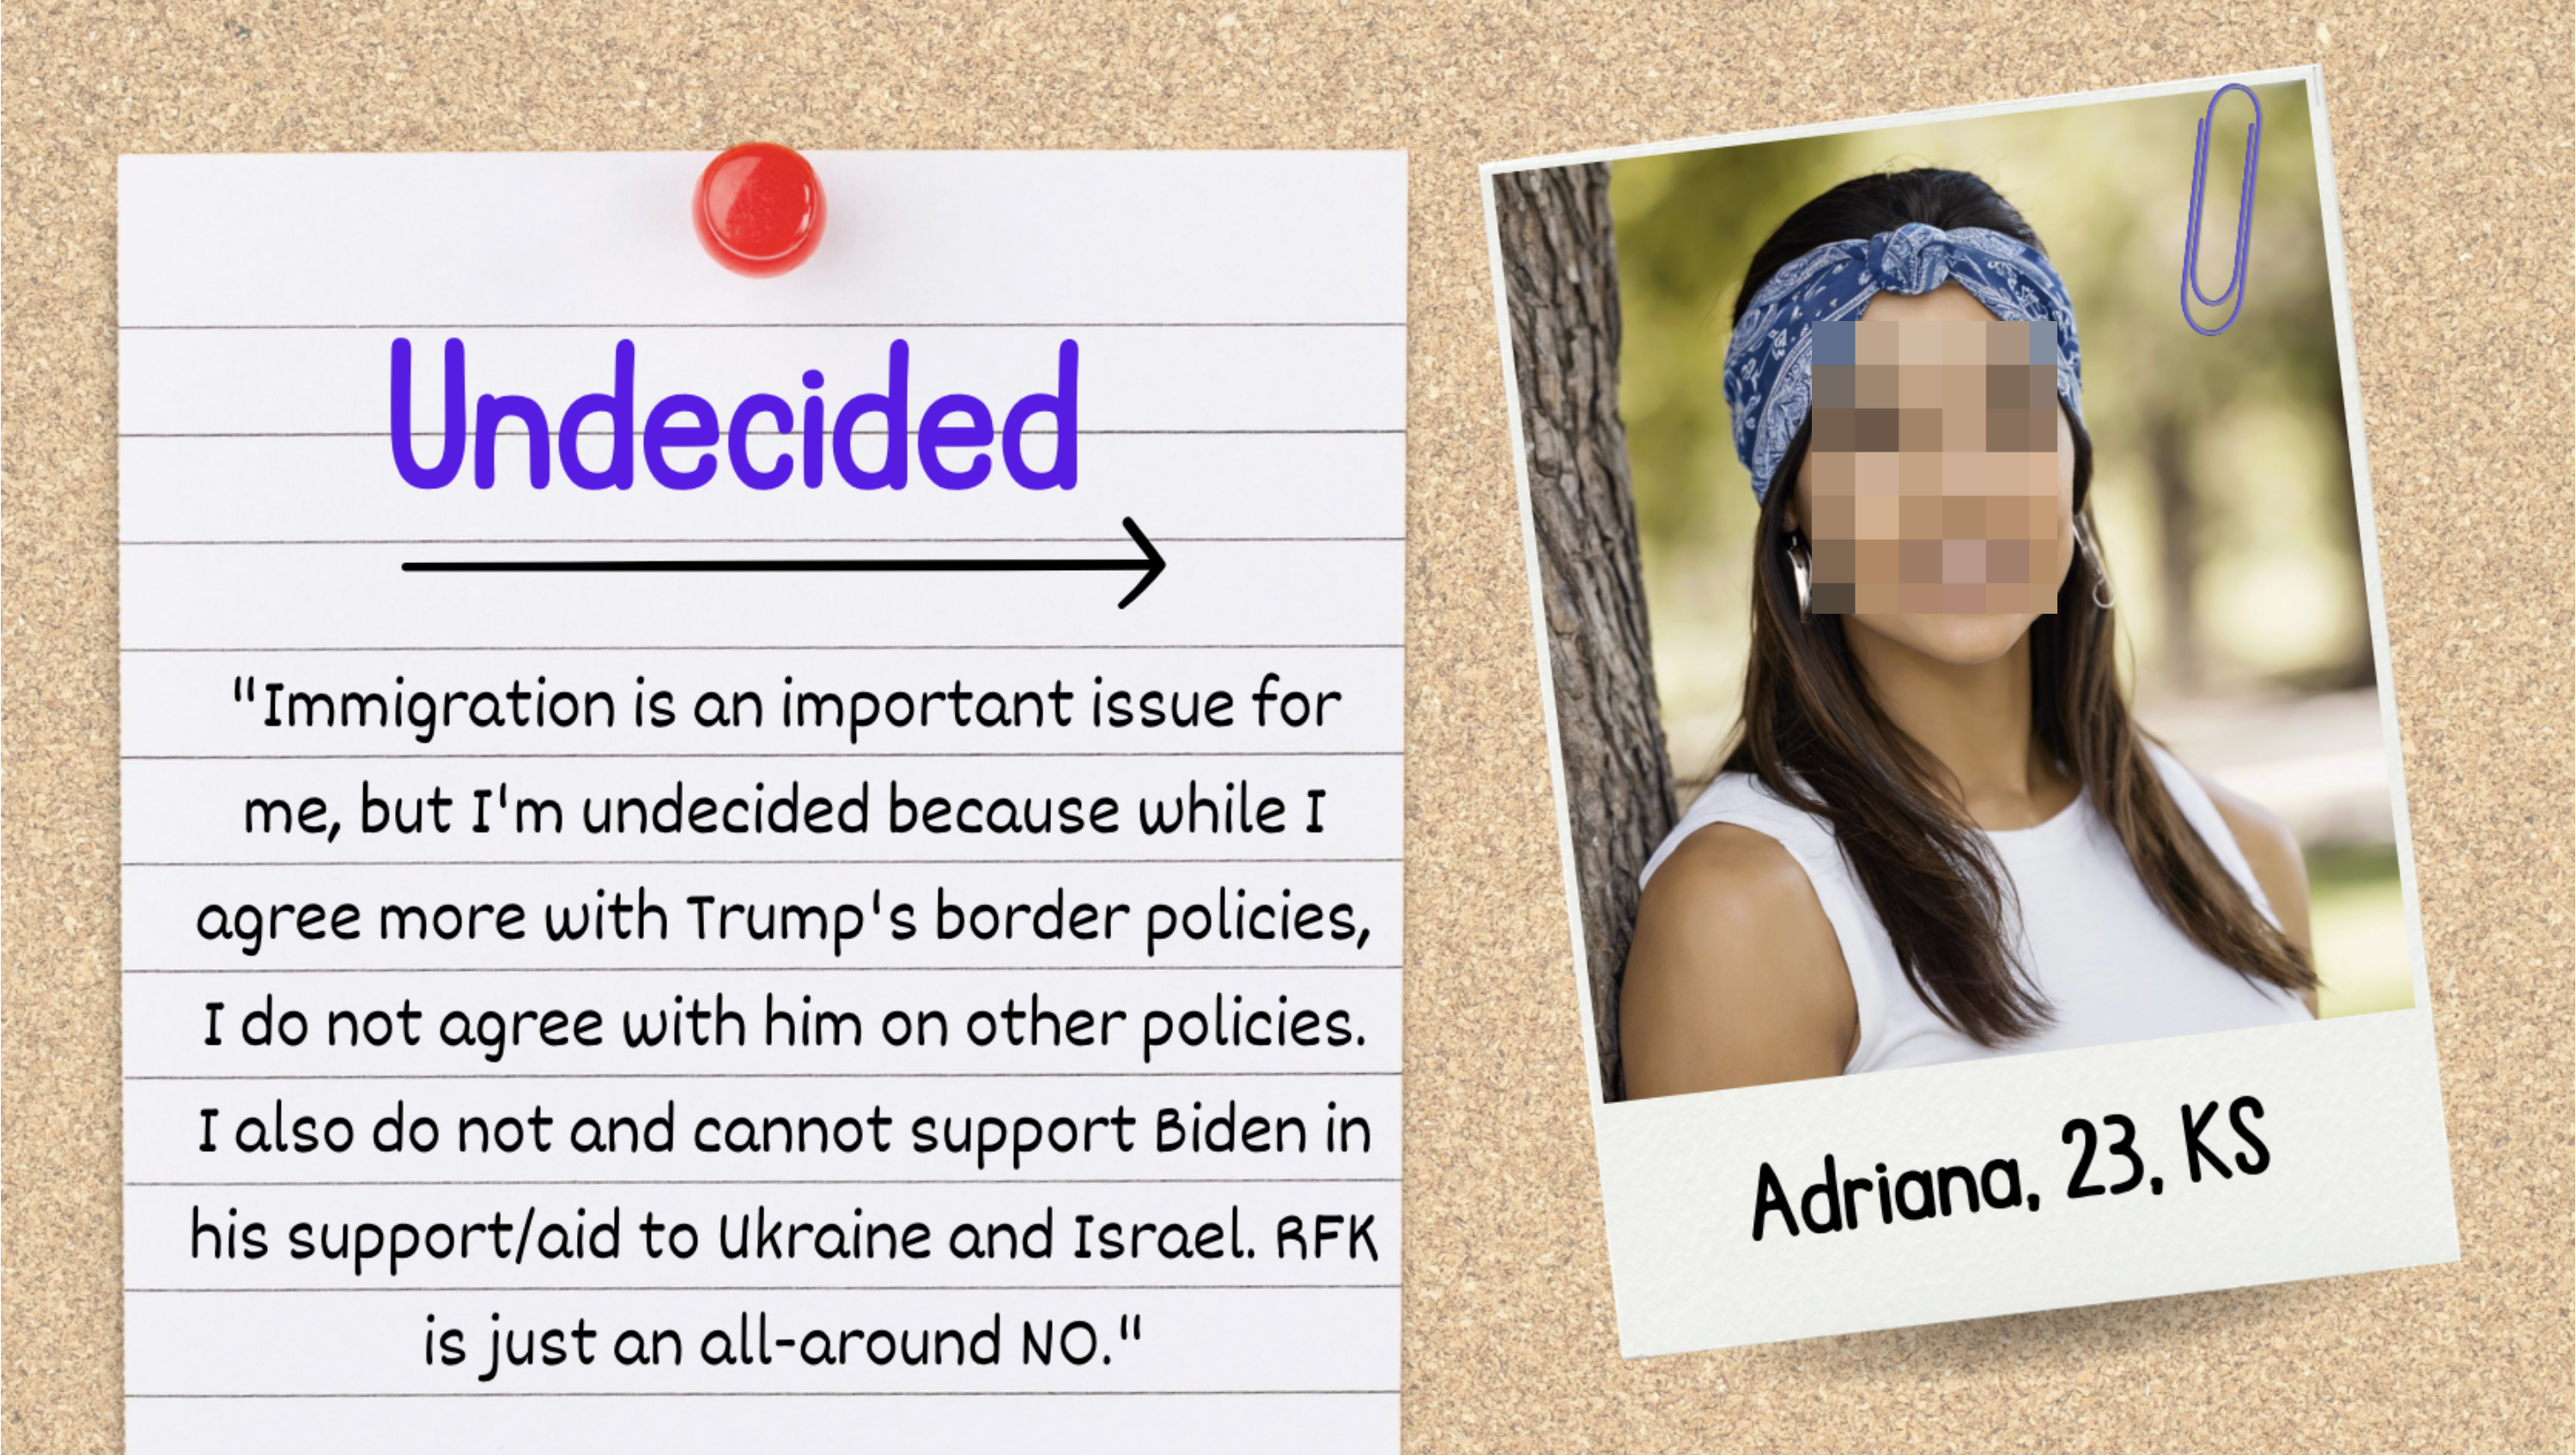 A bulletin board with a pinned note titled &quot;Undecided&quot; and a quote about immigration and political views